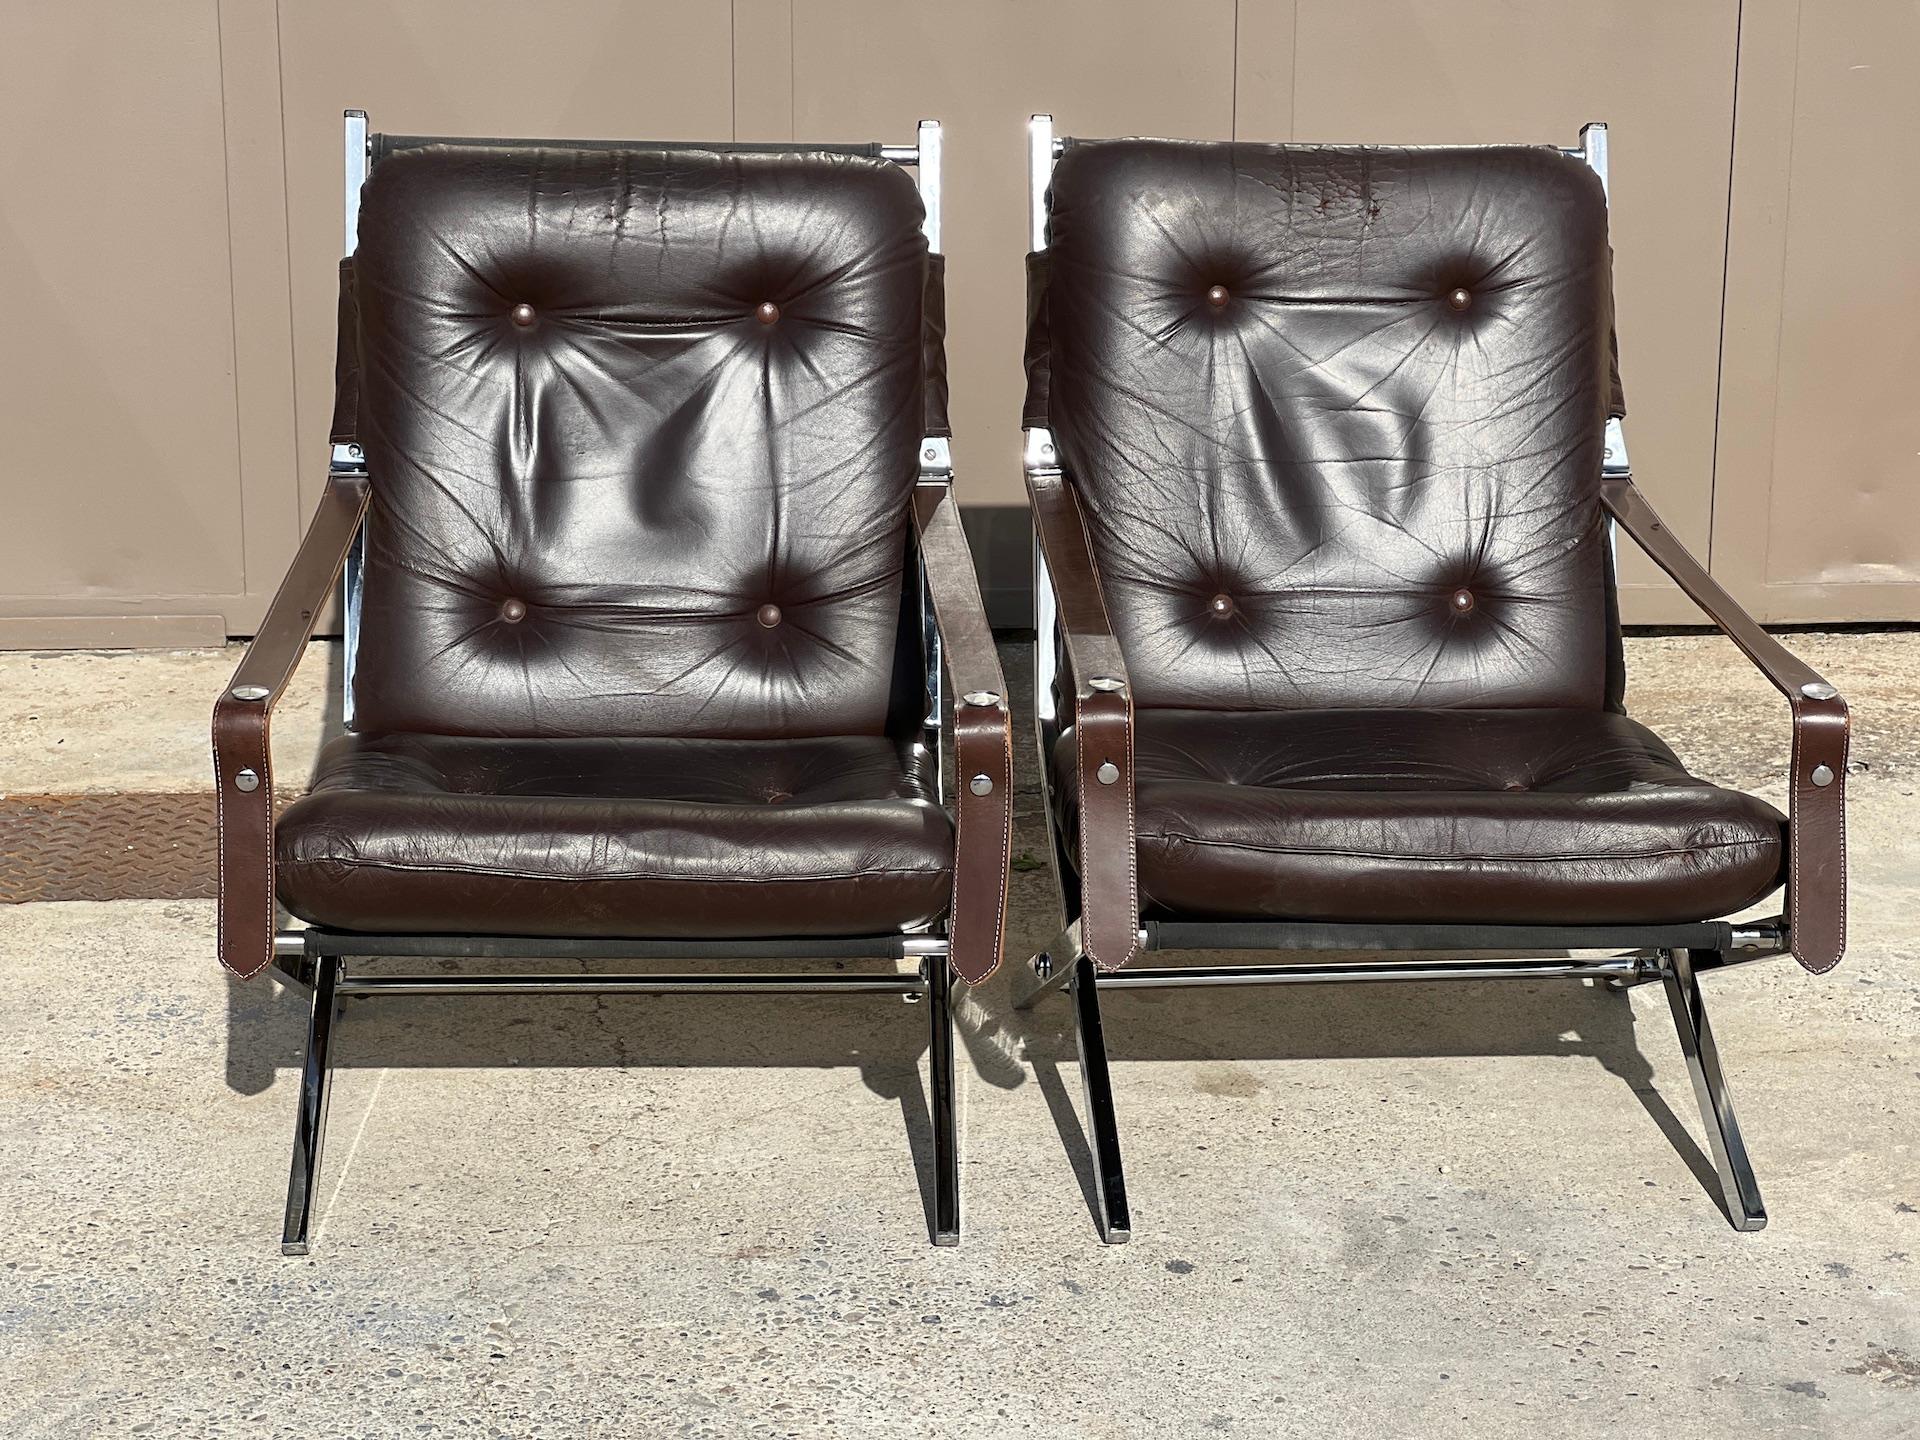 Pair of folding armchairs by Robert Duran 1970. Structure is in chromed metal. The seat and back in chocolate leather. Armrests with adjustable leather straps. In good condition, the leather has a nice patina.